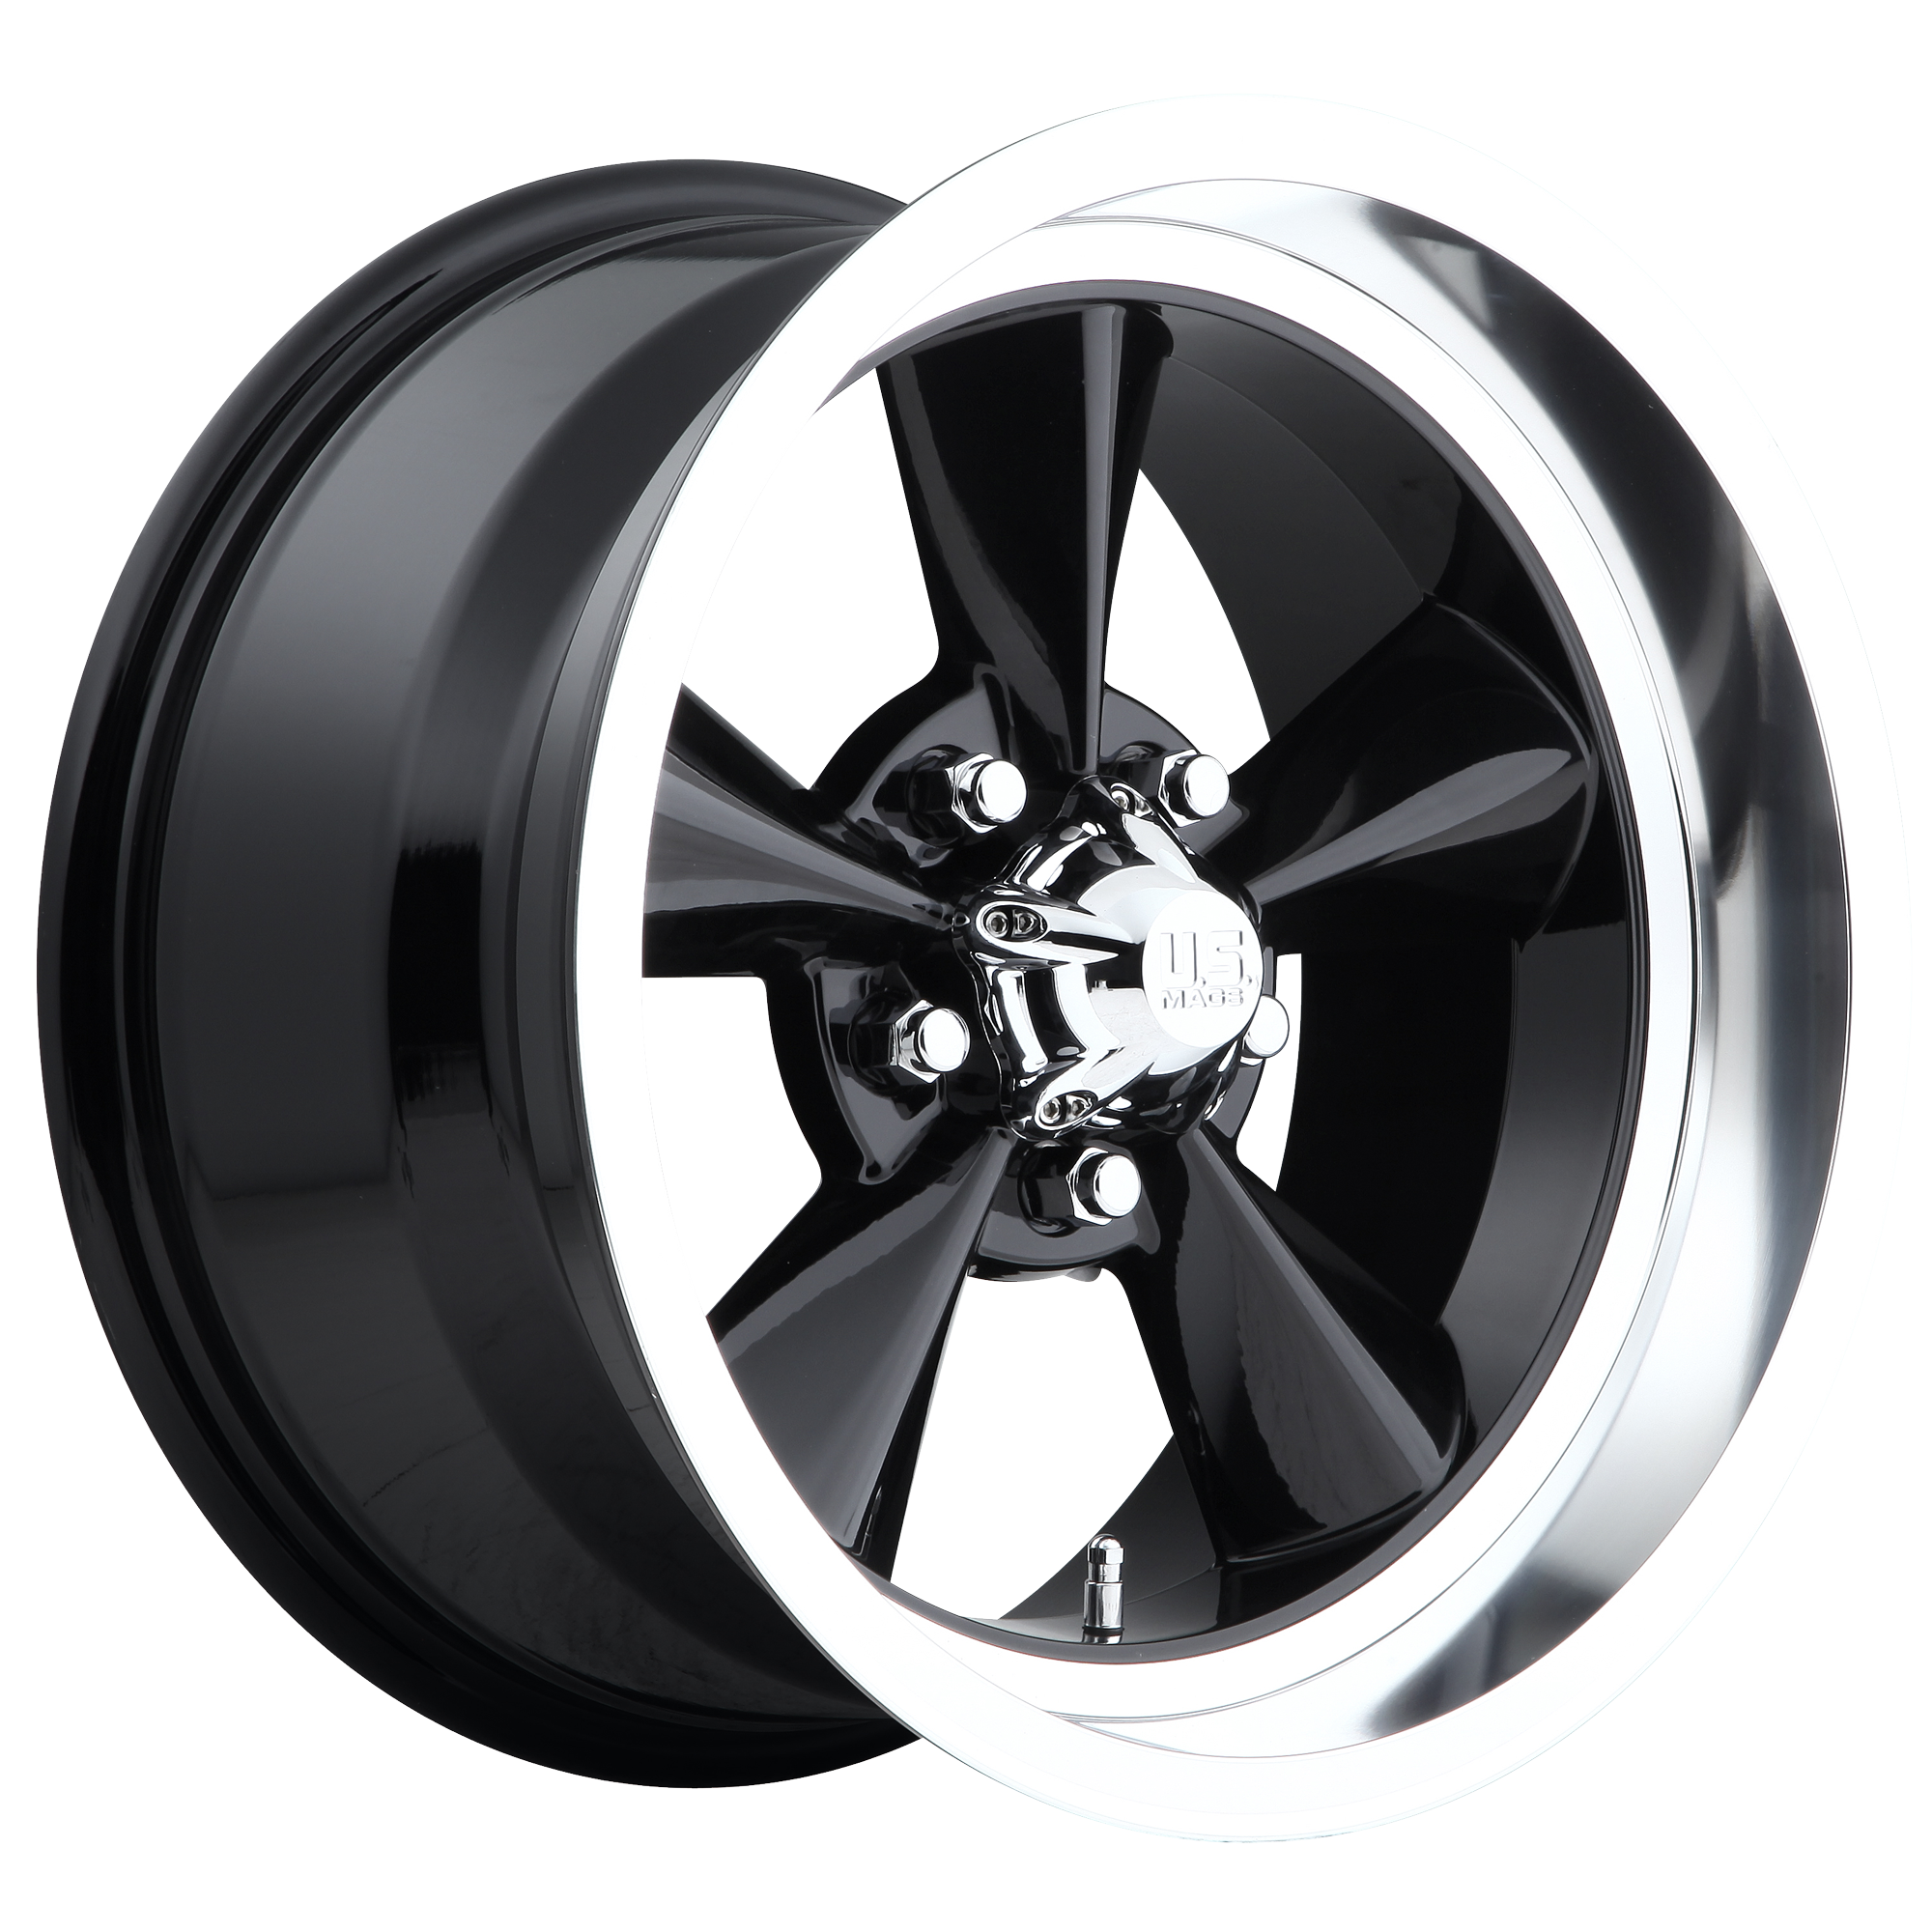 STANDARD 17x7 5x114.30 GLOSS BLACK (1 mm) - Tires and Engine Performance